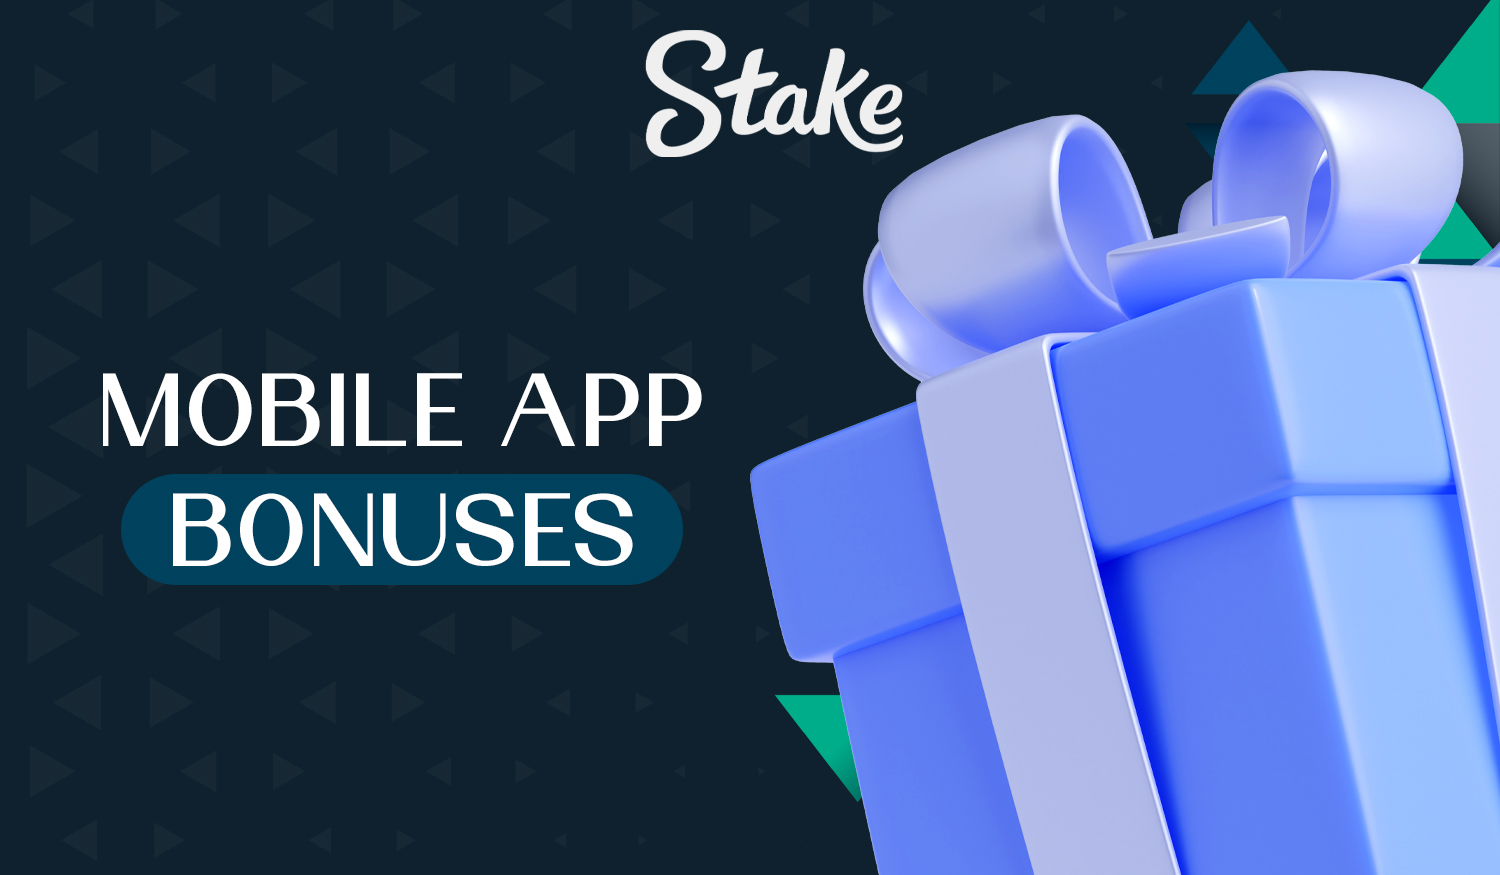 What rewards are available for Indian users in the Stake app? 